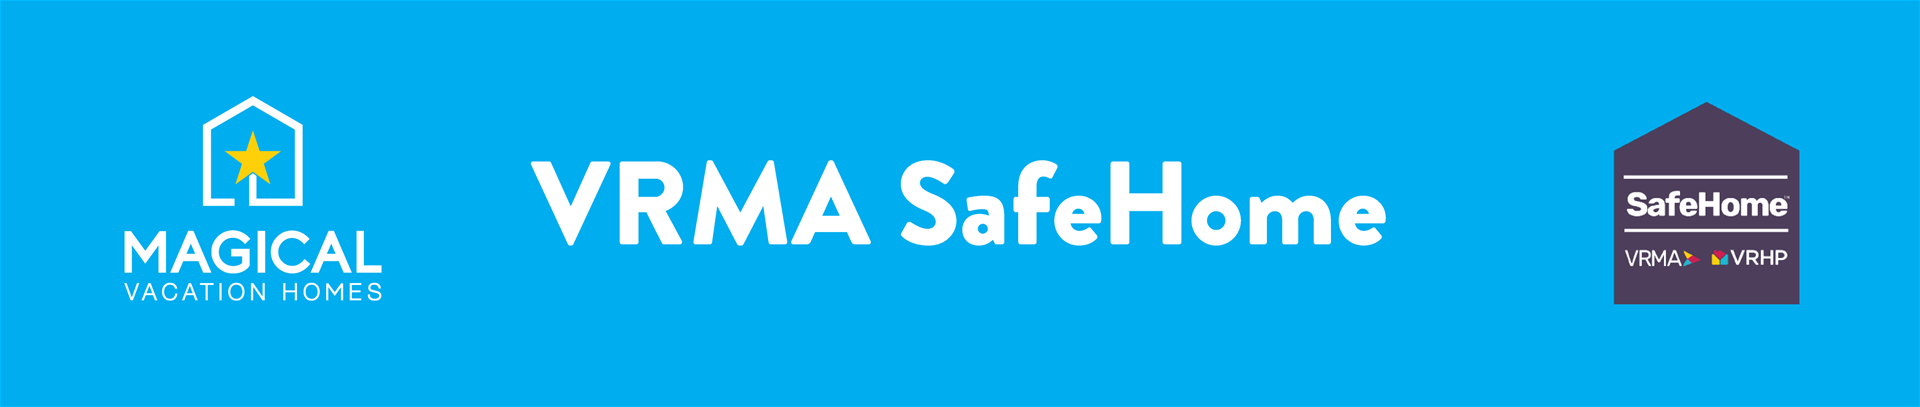 Blue graphic for VRMA SafeHome featuring Magical Vacation Homes logo on left and SafeHome VRMA VRHP on right